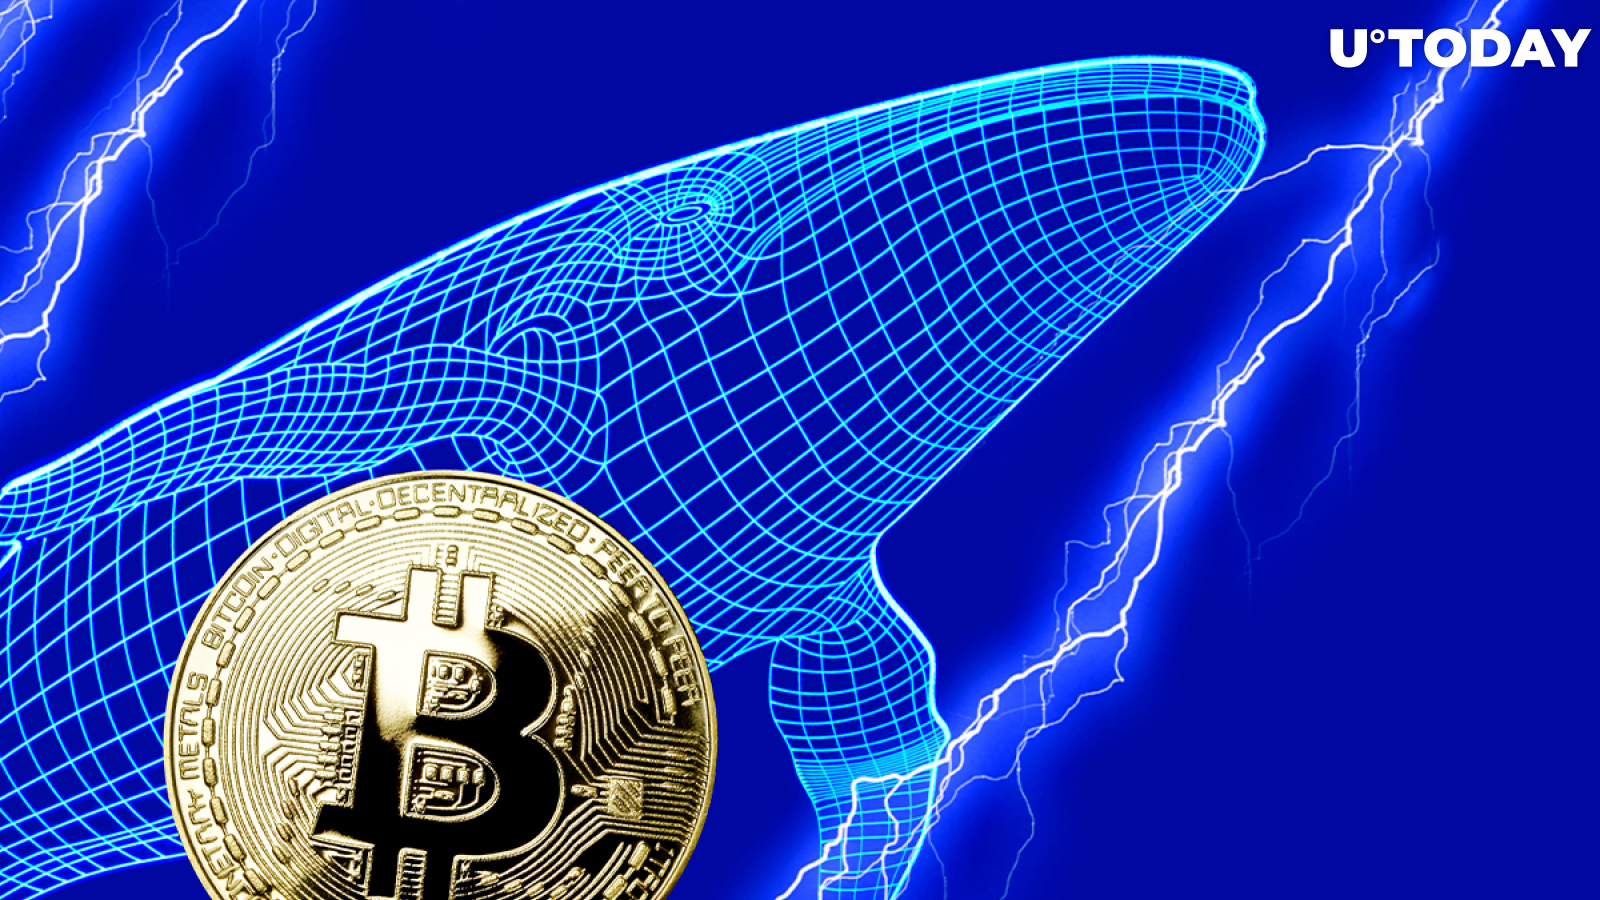 Bitcoin Whales Buying Activity on Rise with 254 New Whales Entering Market